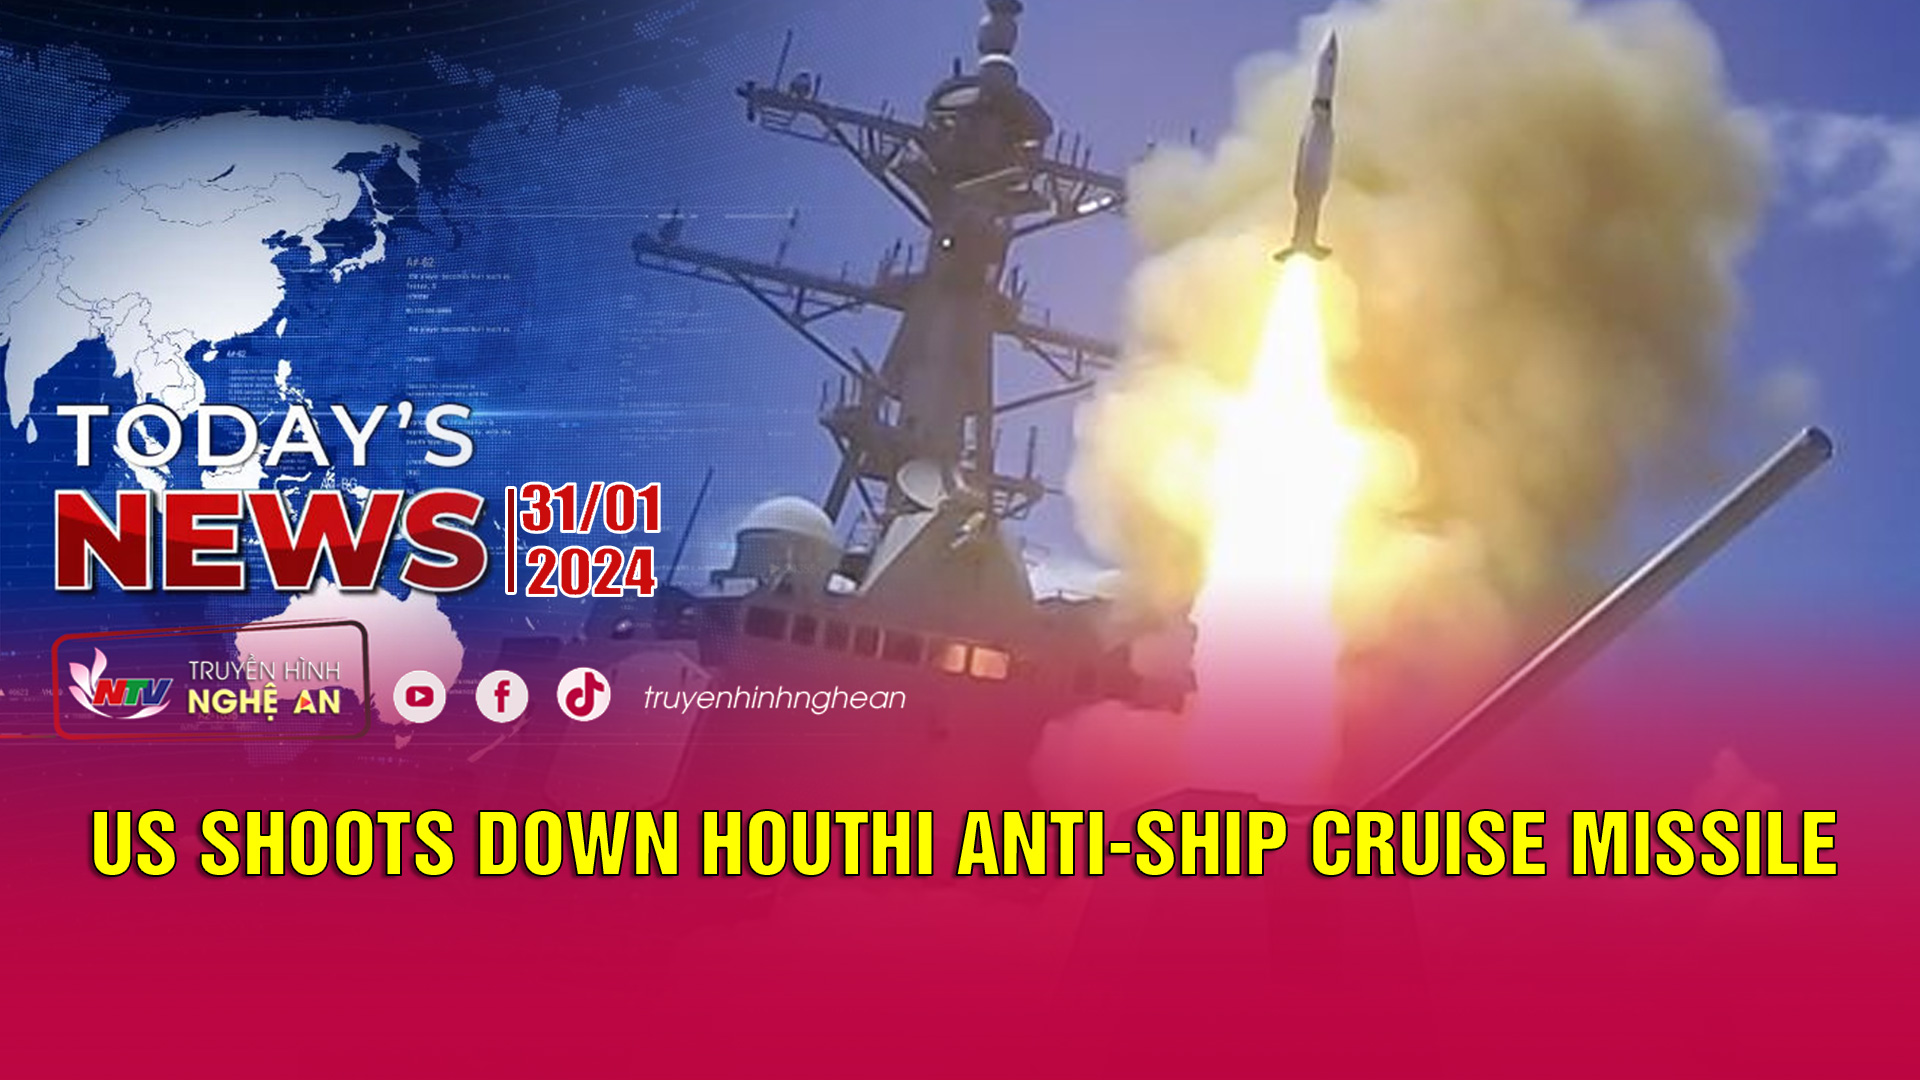 Today's News - 31/01/2024: US shoots down Houthi anti-ship cruise missile